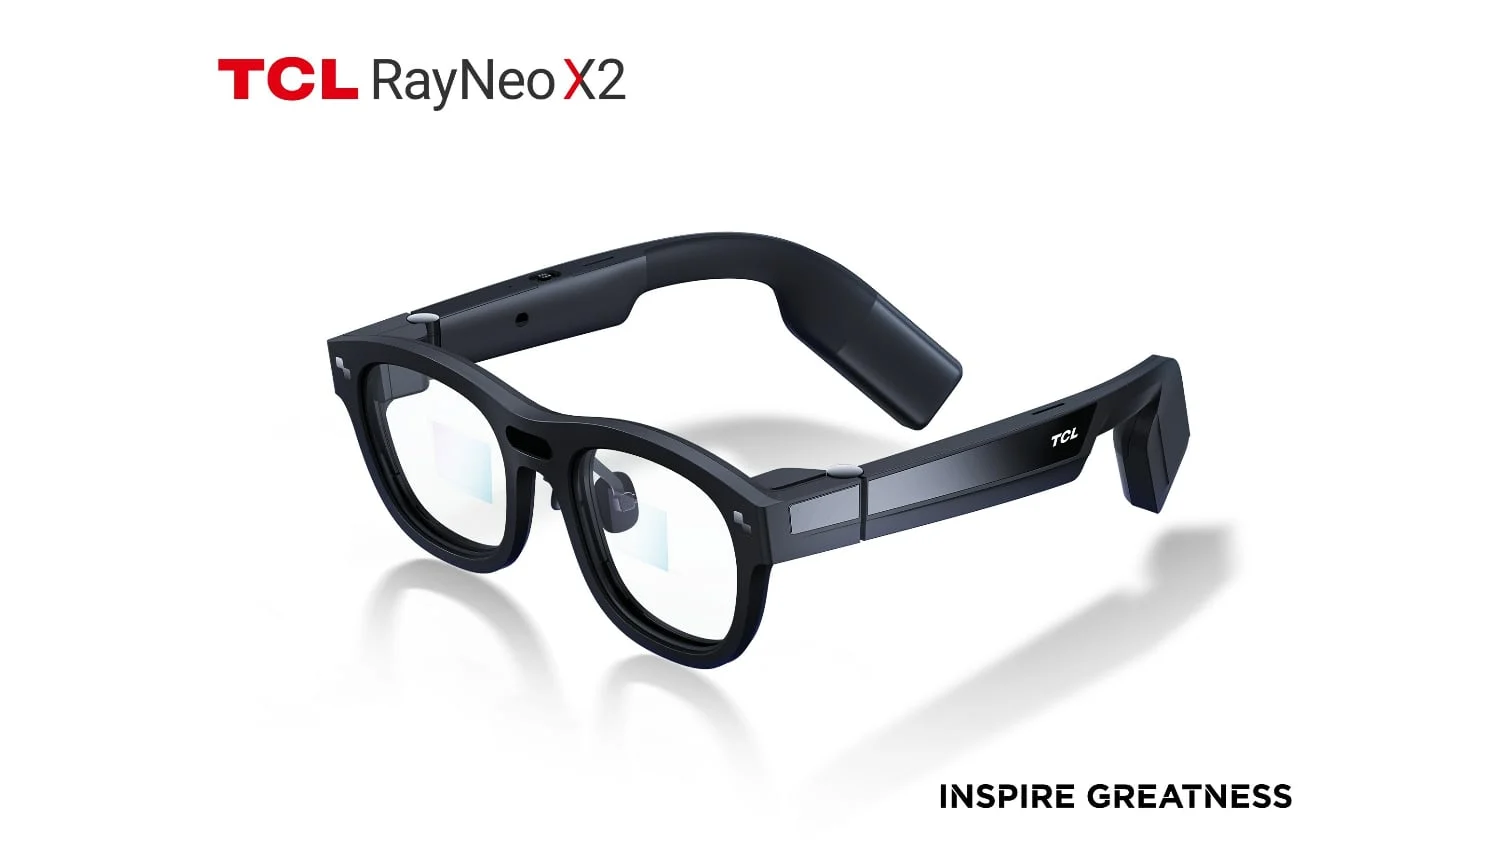 PR image of the TCL RayNeo X2 AR glasses with the product name and phrase 